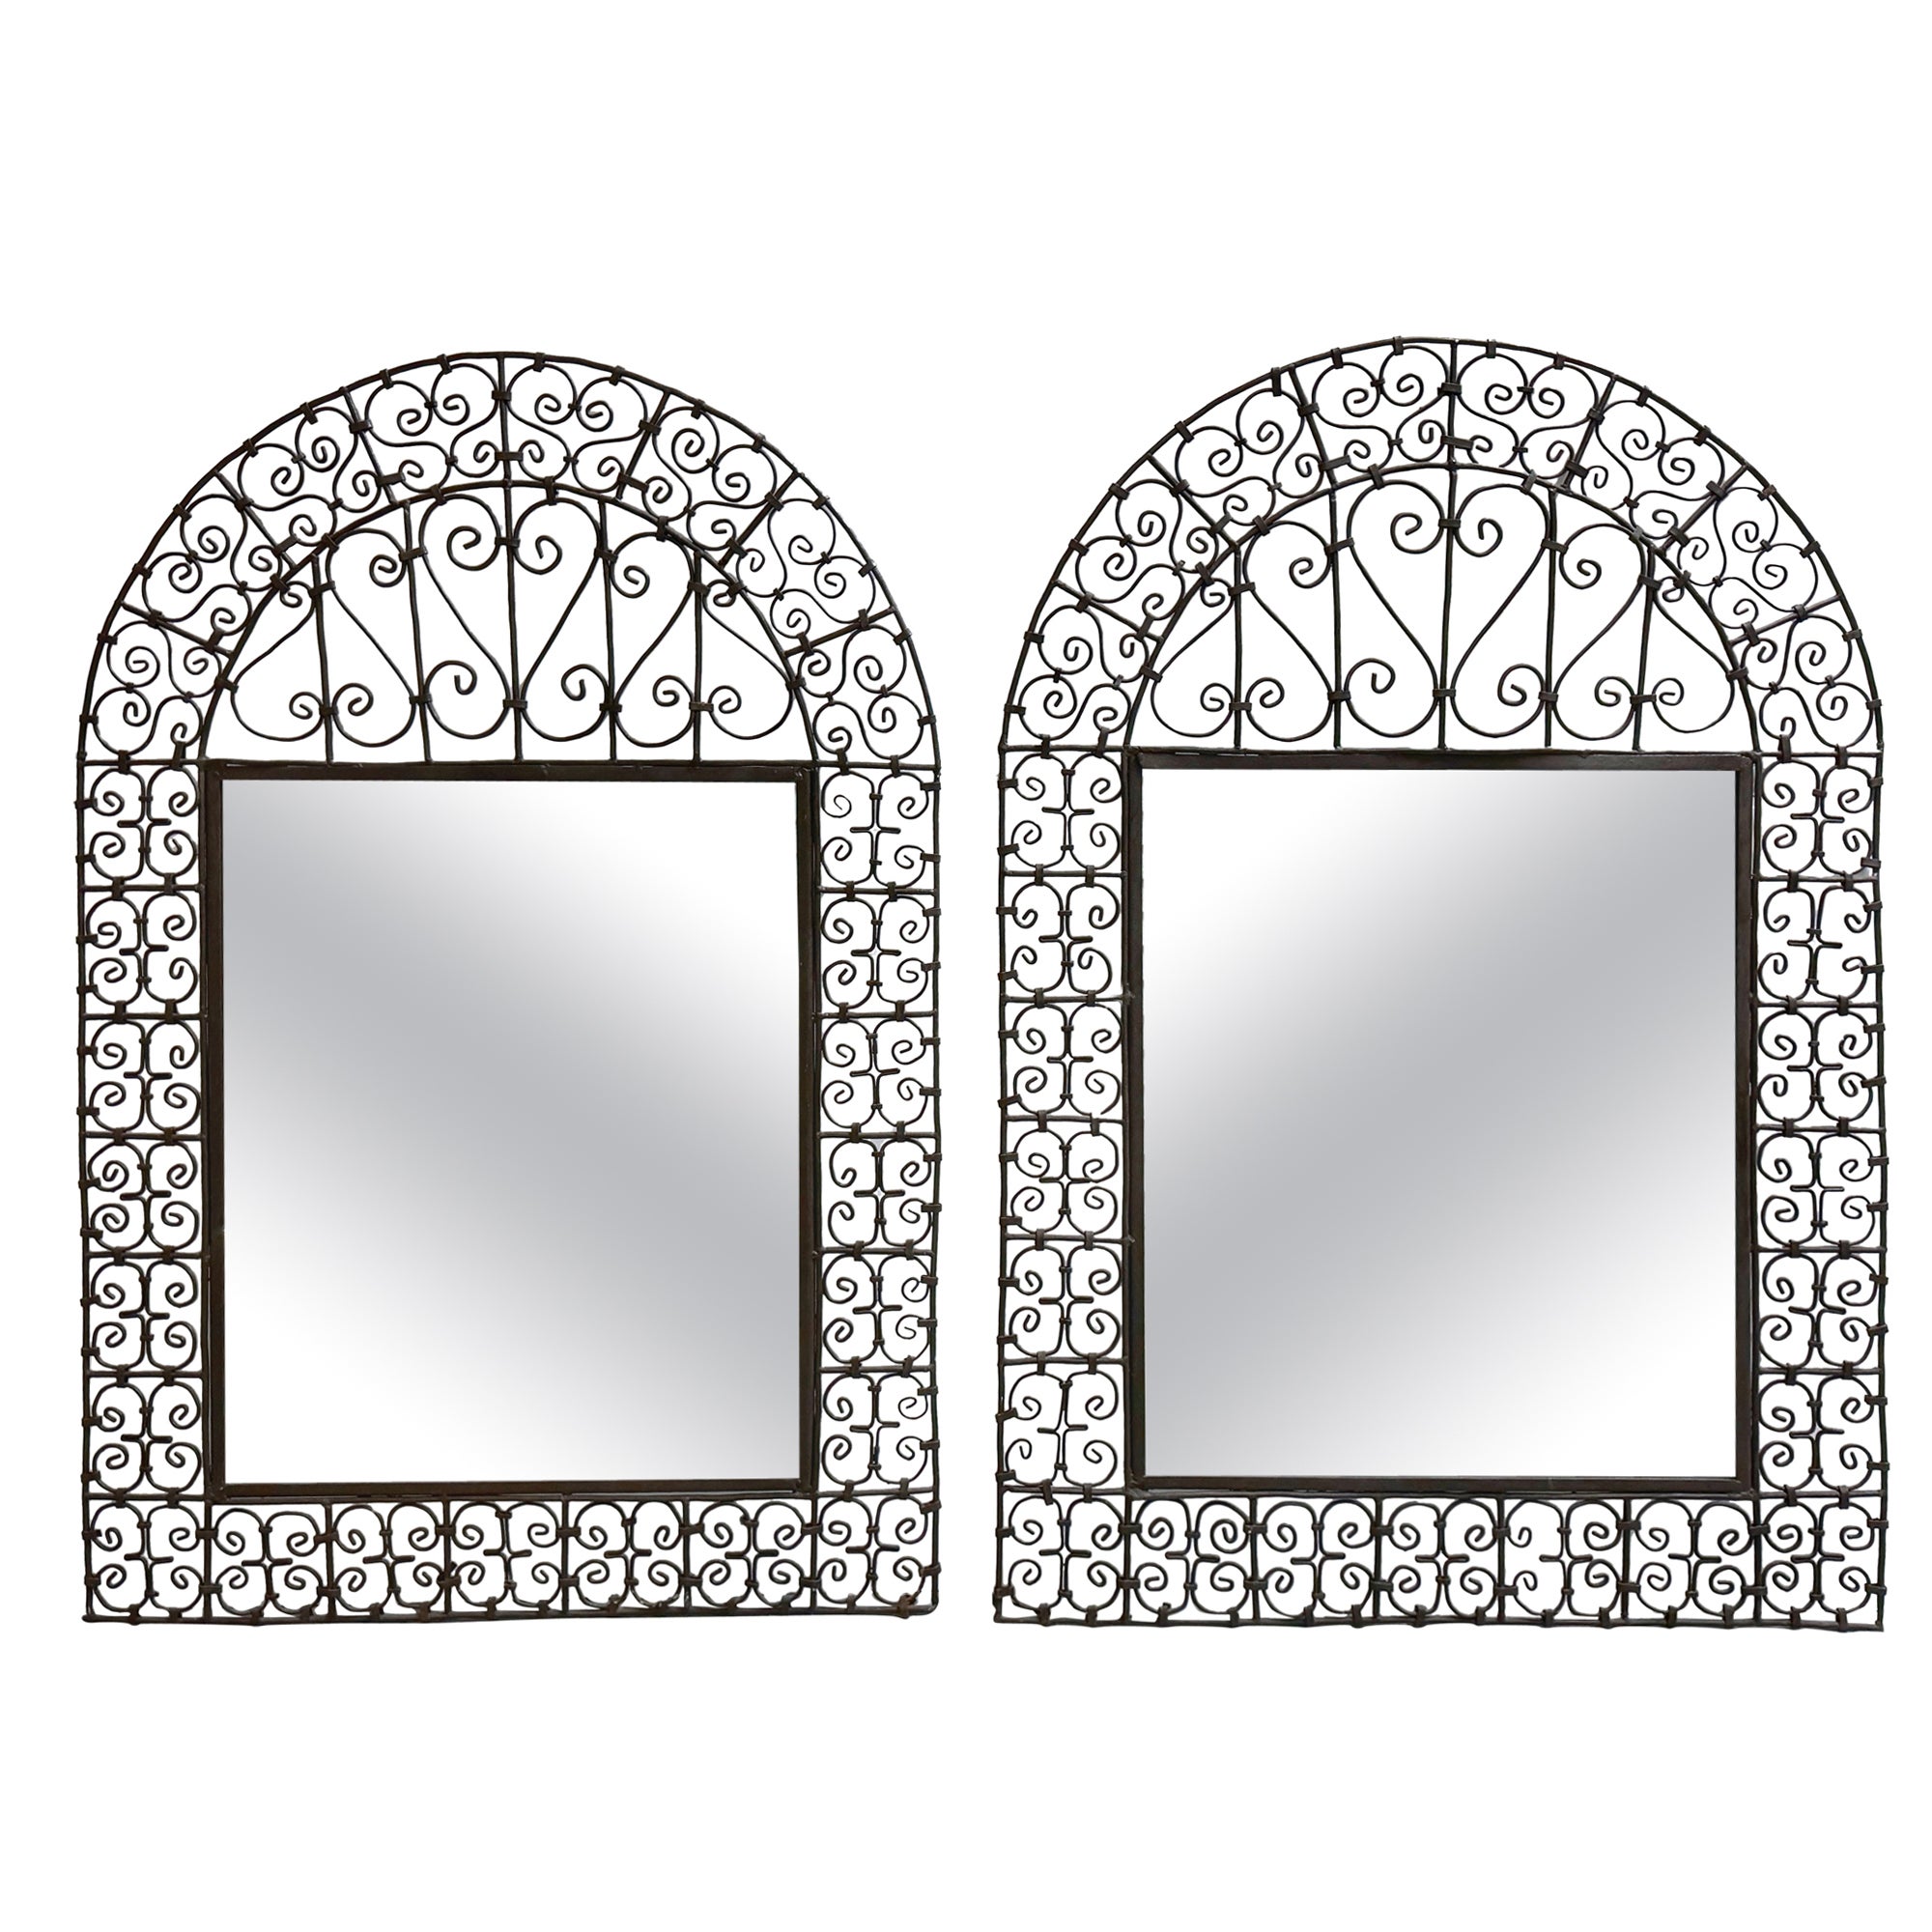 Pair of Spanish Colonial Wrought Iron Trellis Motif Mirrors For Sale